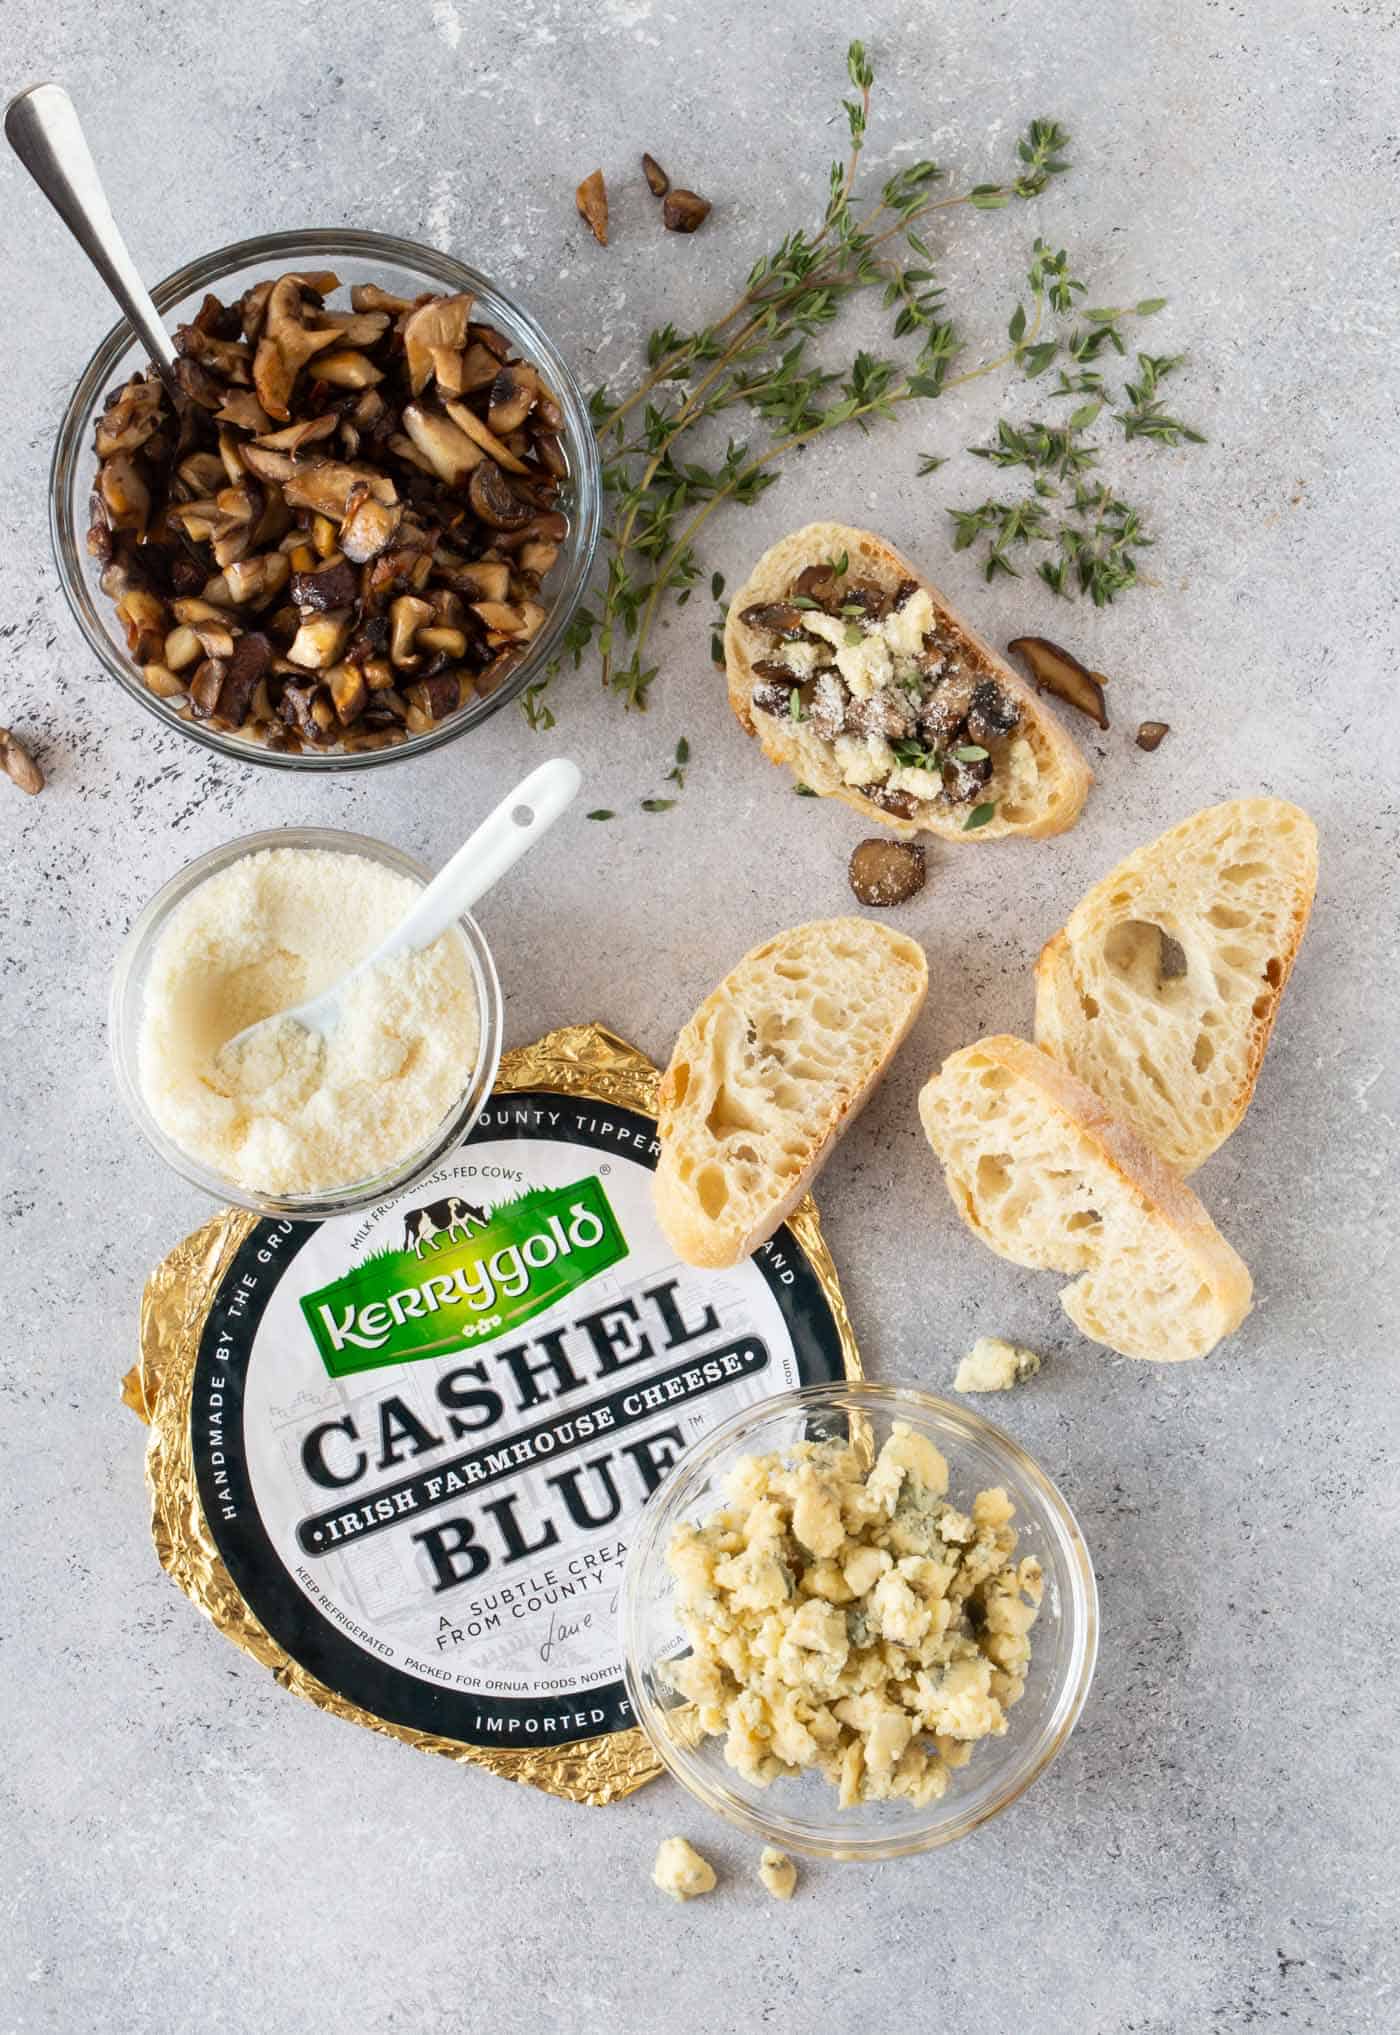 mushroom crostini with blue cheese and thyme